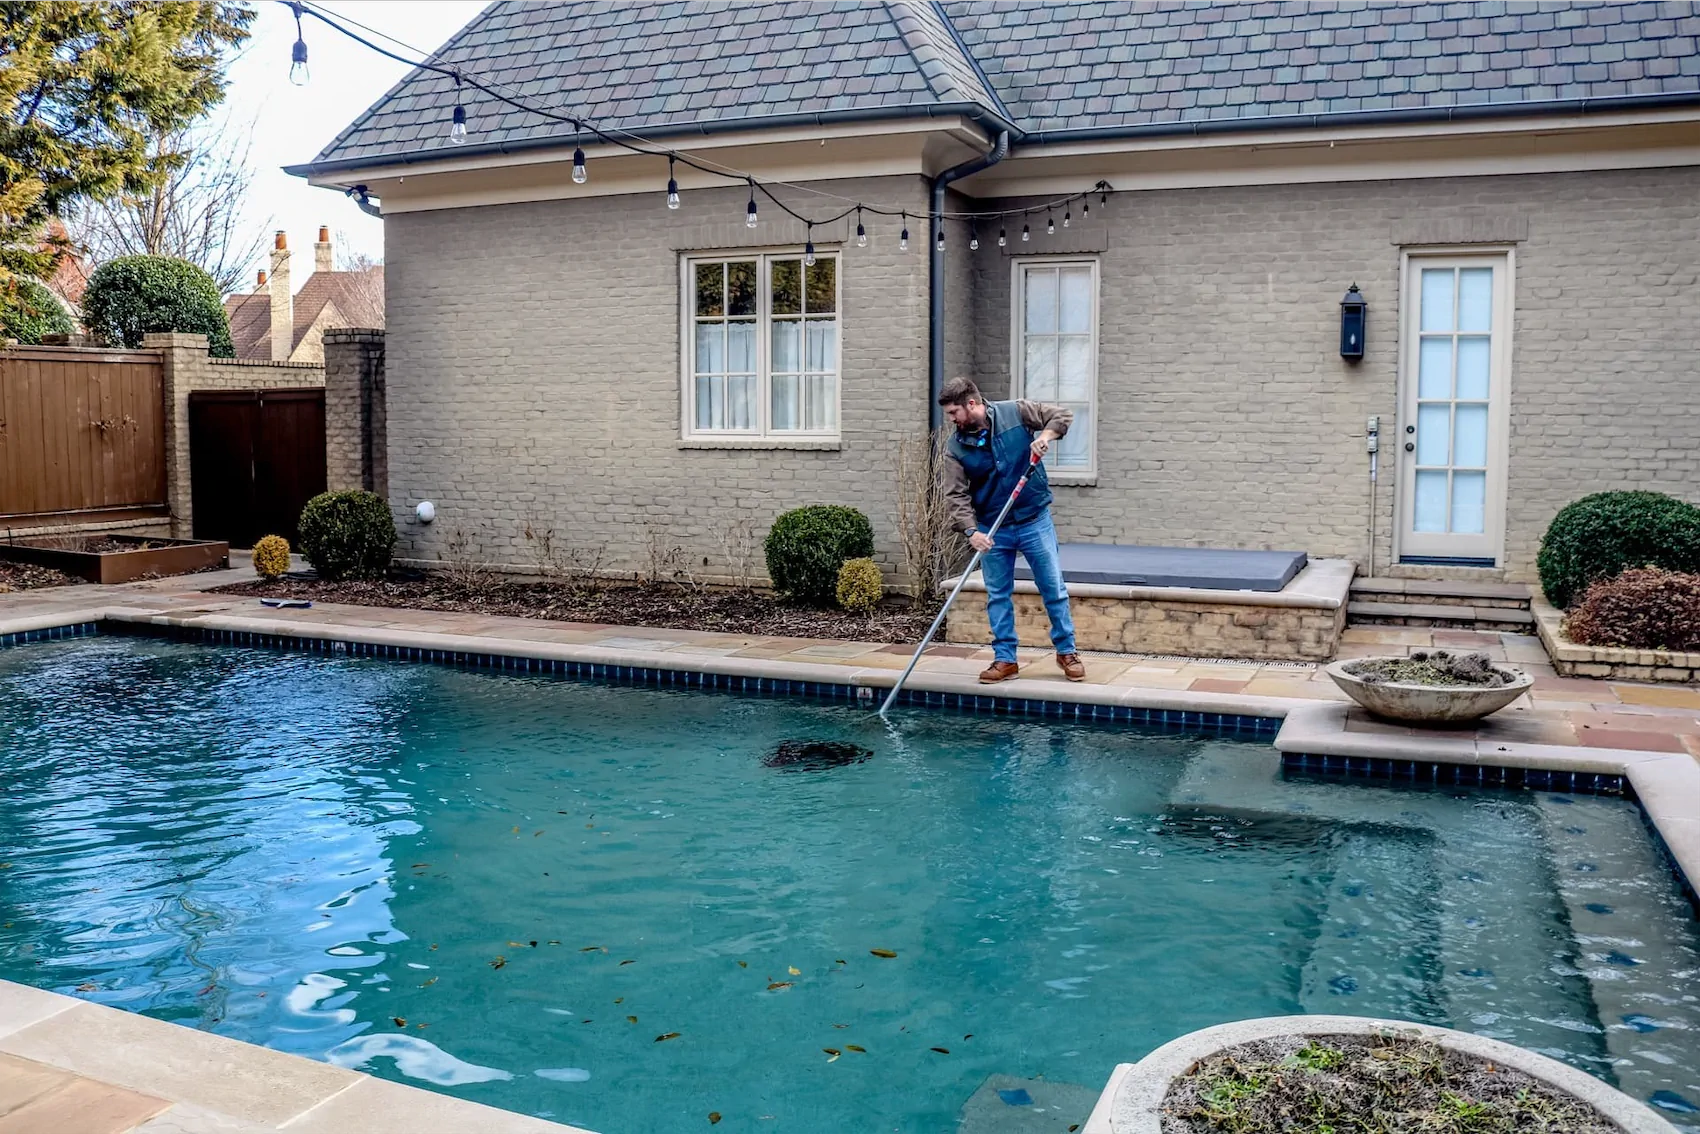 pool brush cleaning is included in our weekly pool maintenance service from Ogden Pools in Memphis, TN